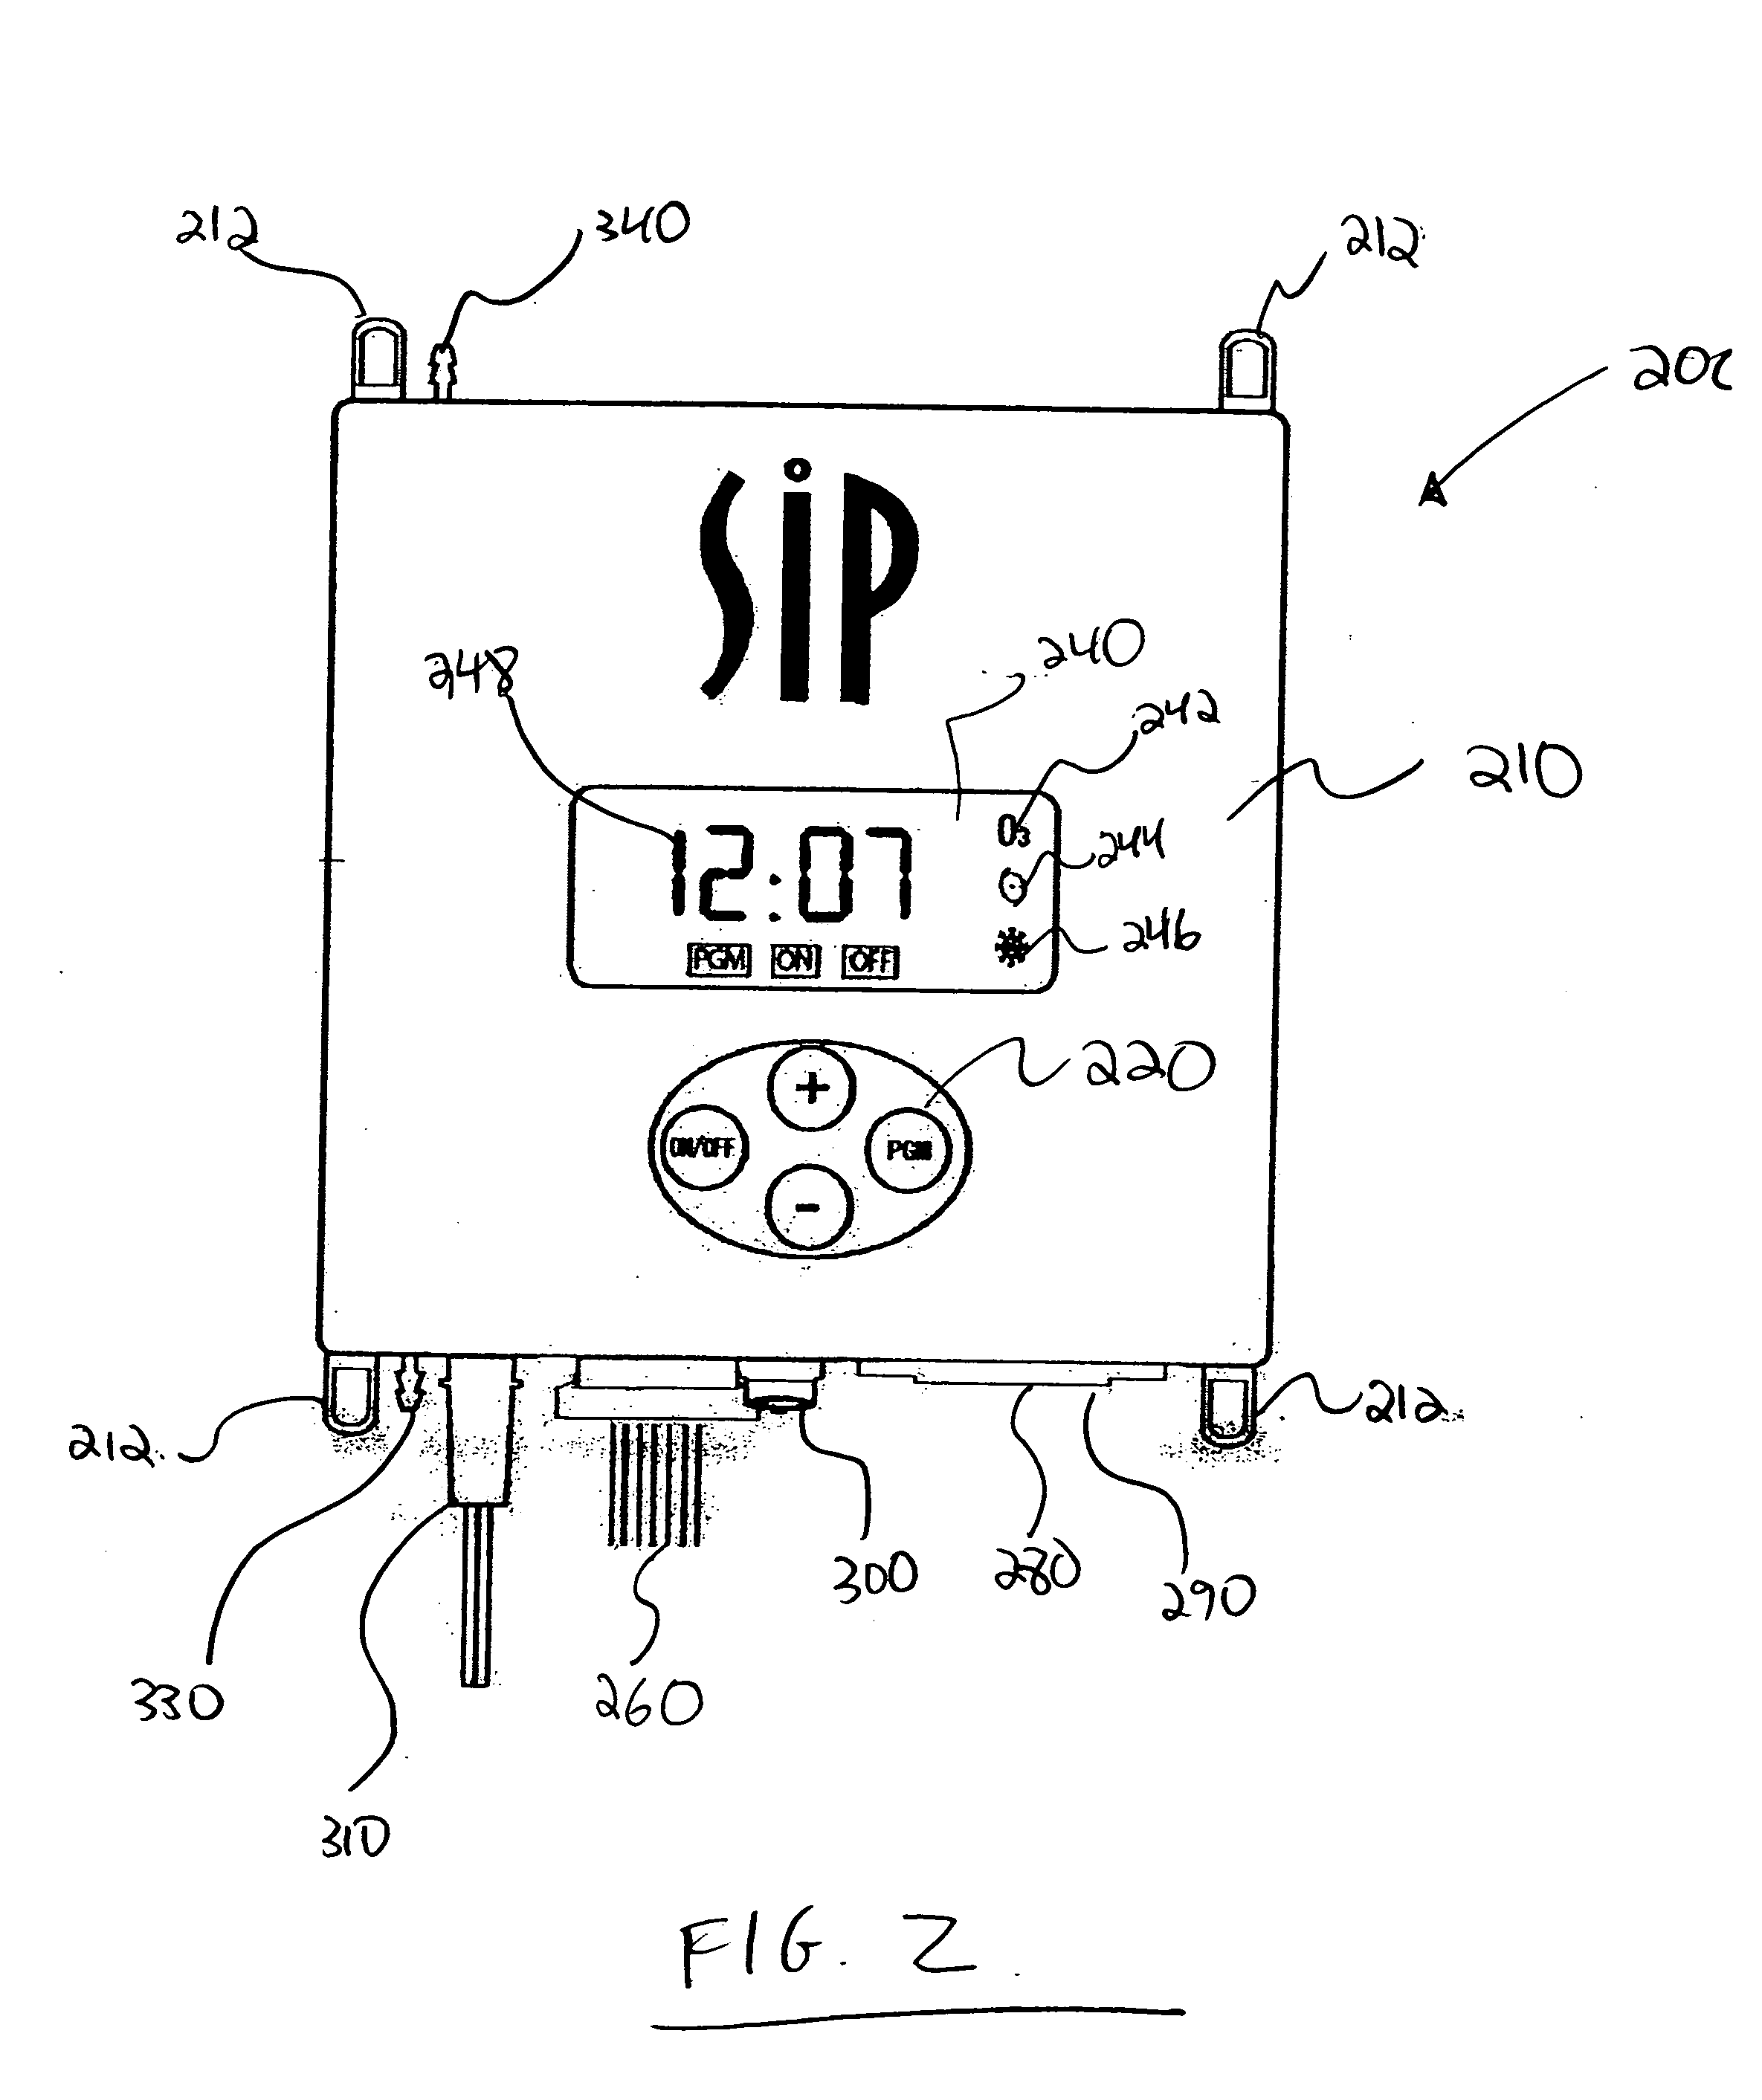 Method and apparatus for programably treating water in a water cooler